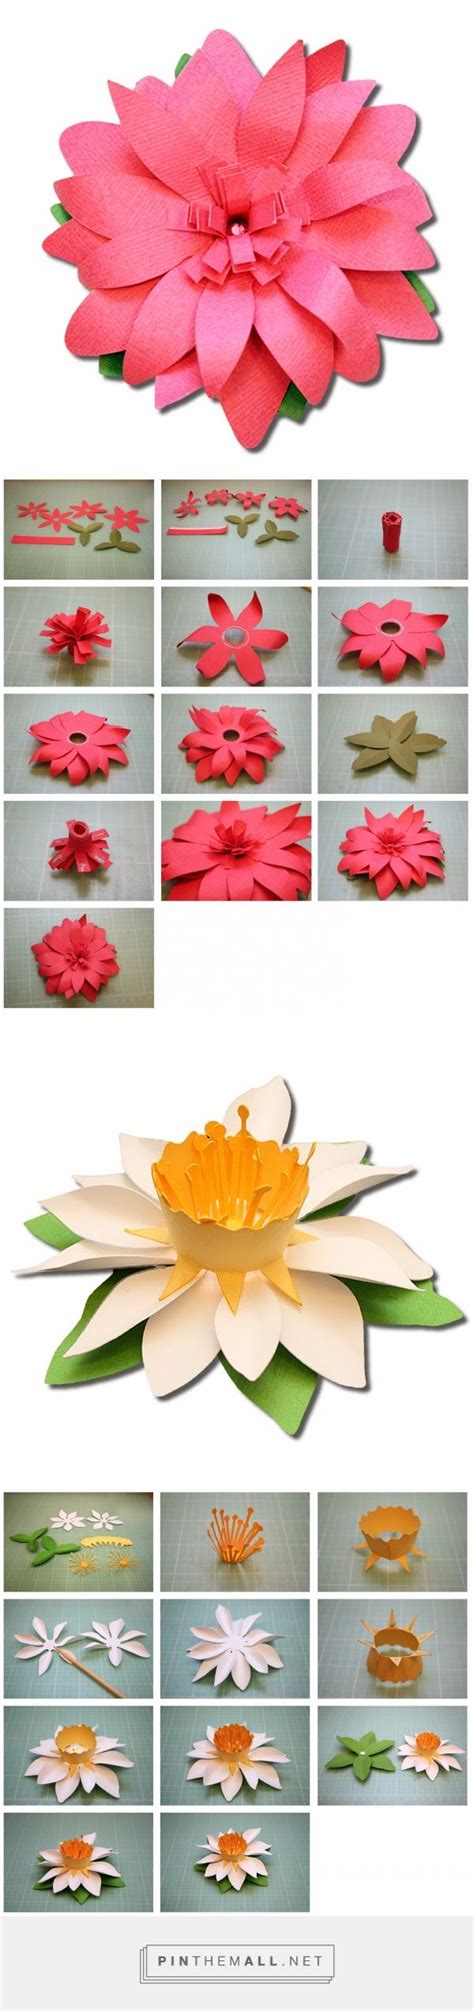 Bits Of Paper Fringed And Spring 3d Paper Flowers A Grouped